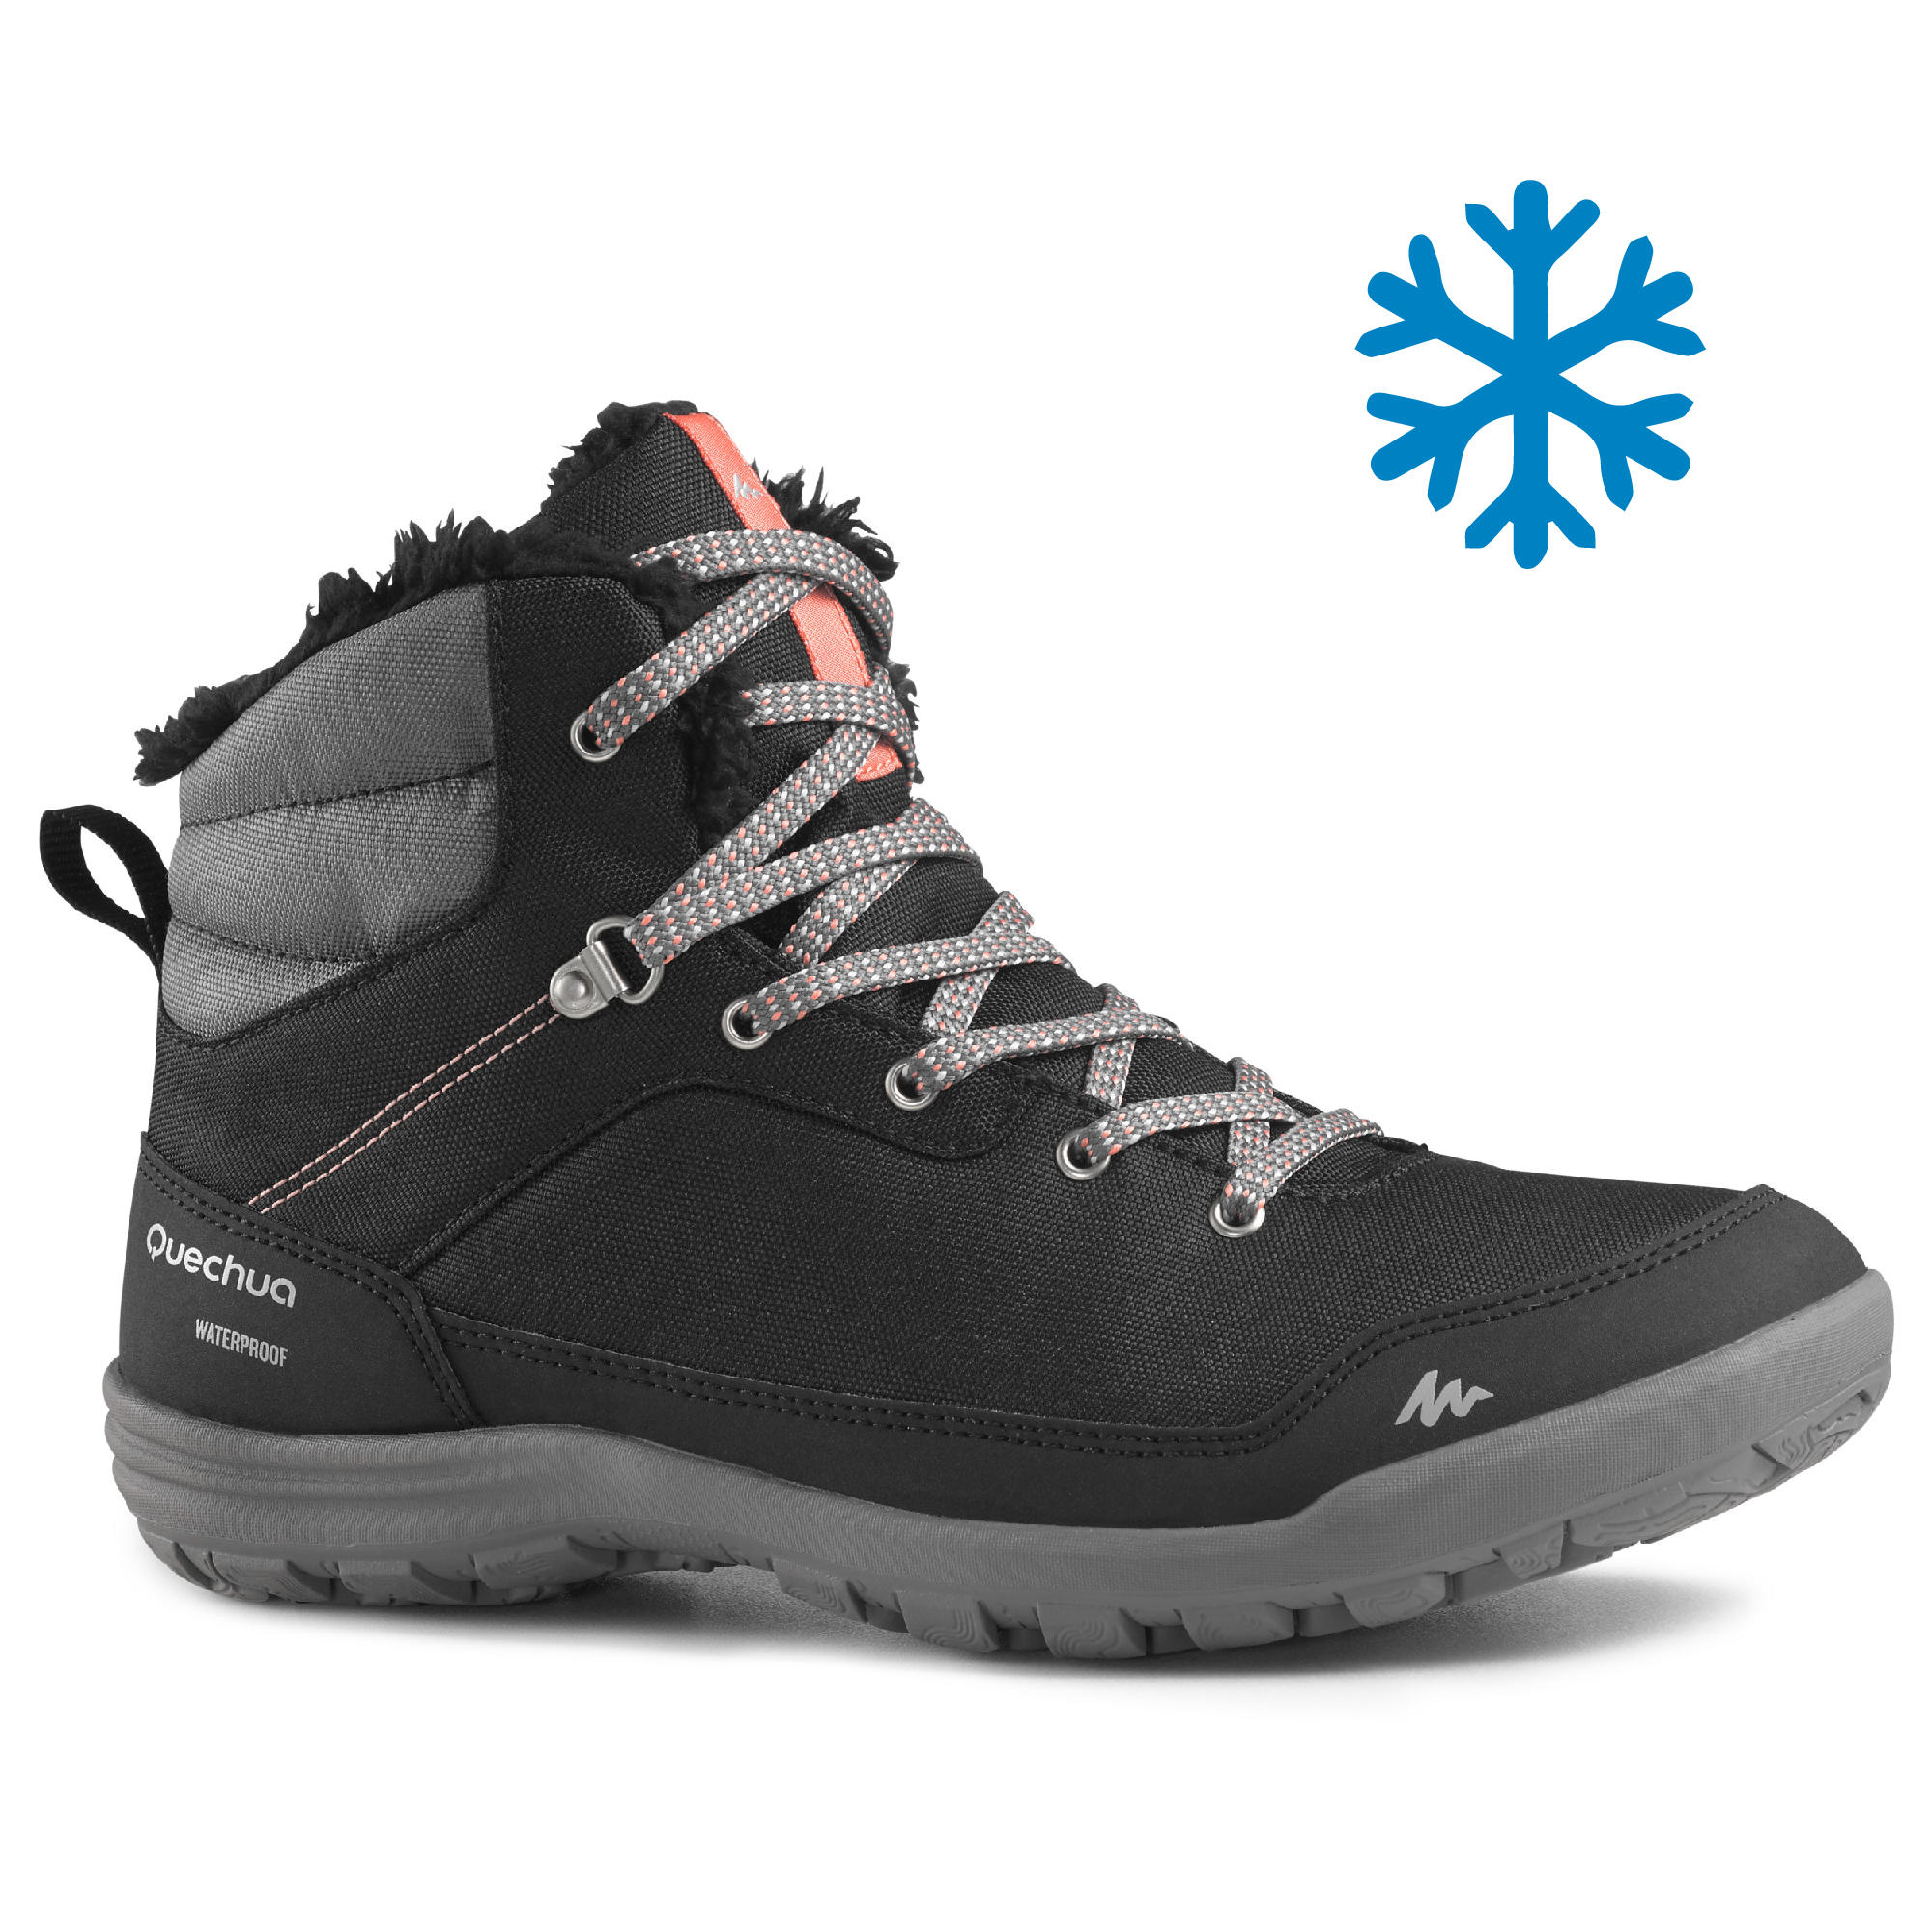 Mens Womens Winter Ankle Snow Hiking Boots Warm Water Resistant Non Slip Soft Lined 